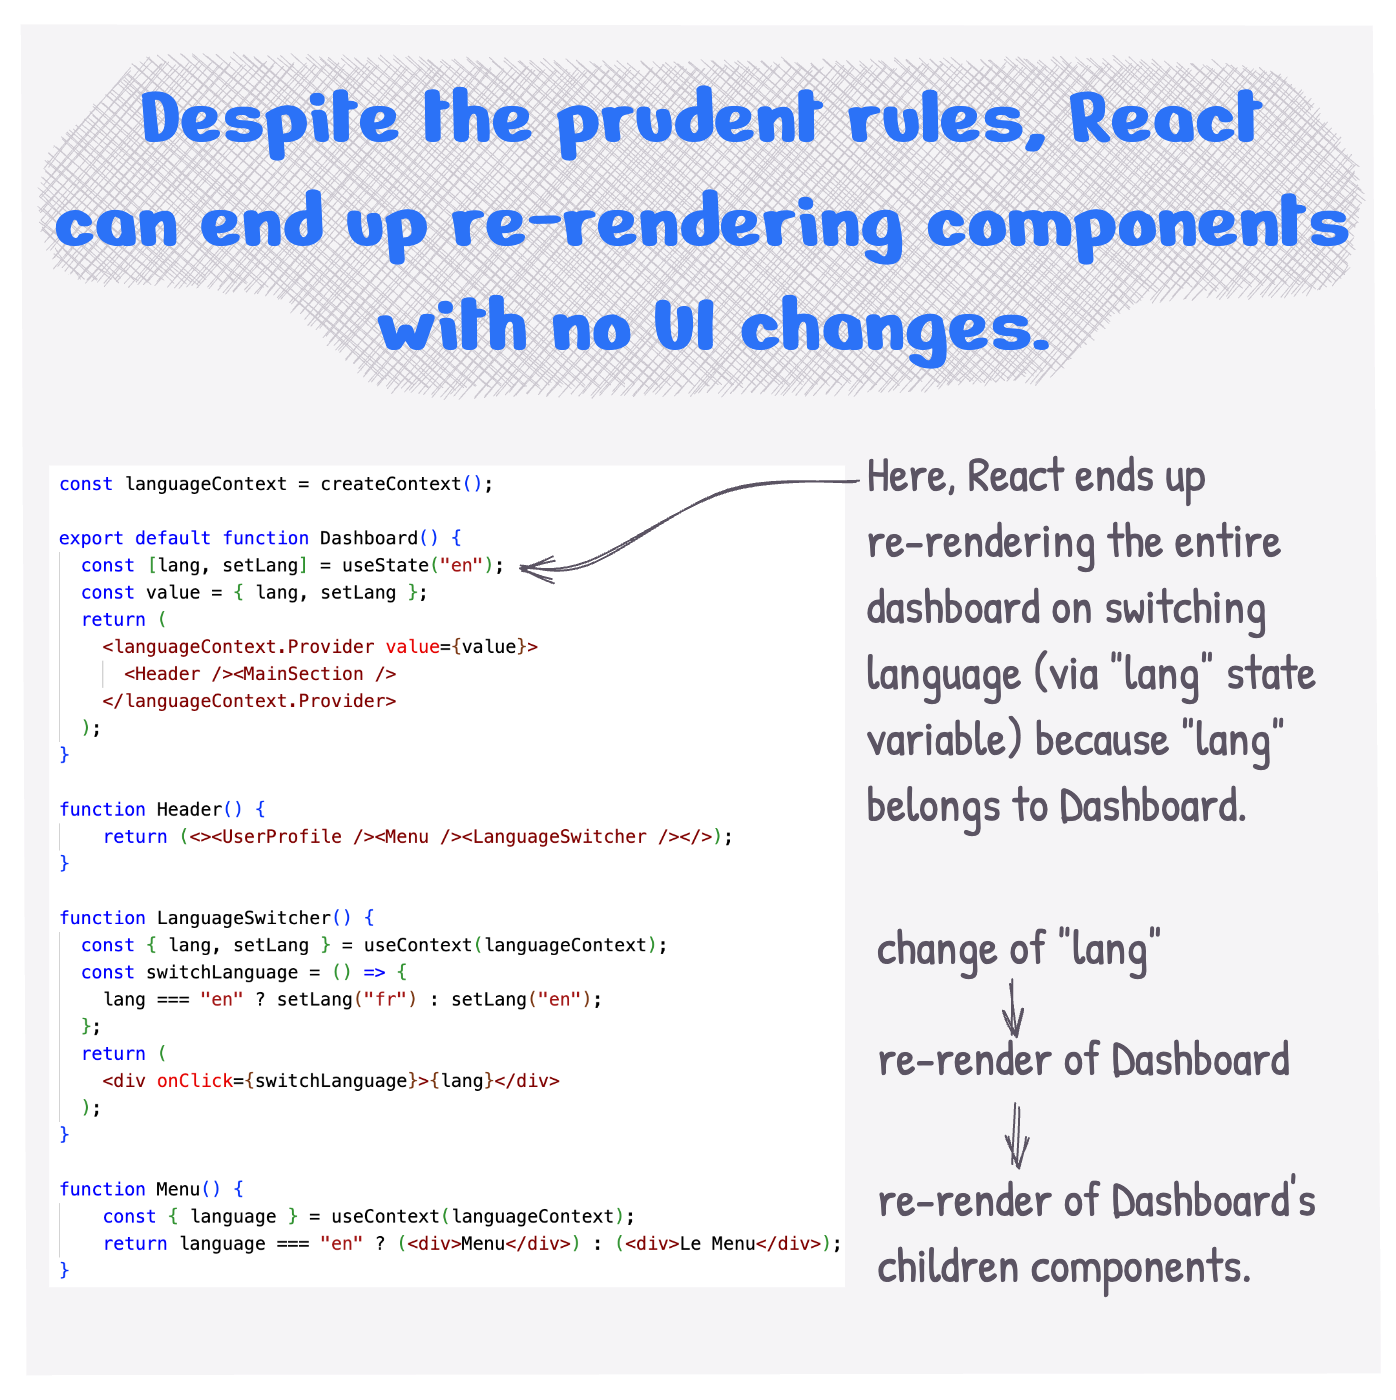 Despite the prudent rules, React can end up re-rendering components with no UI changes.